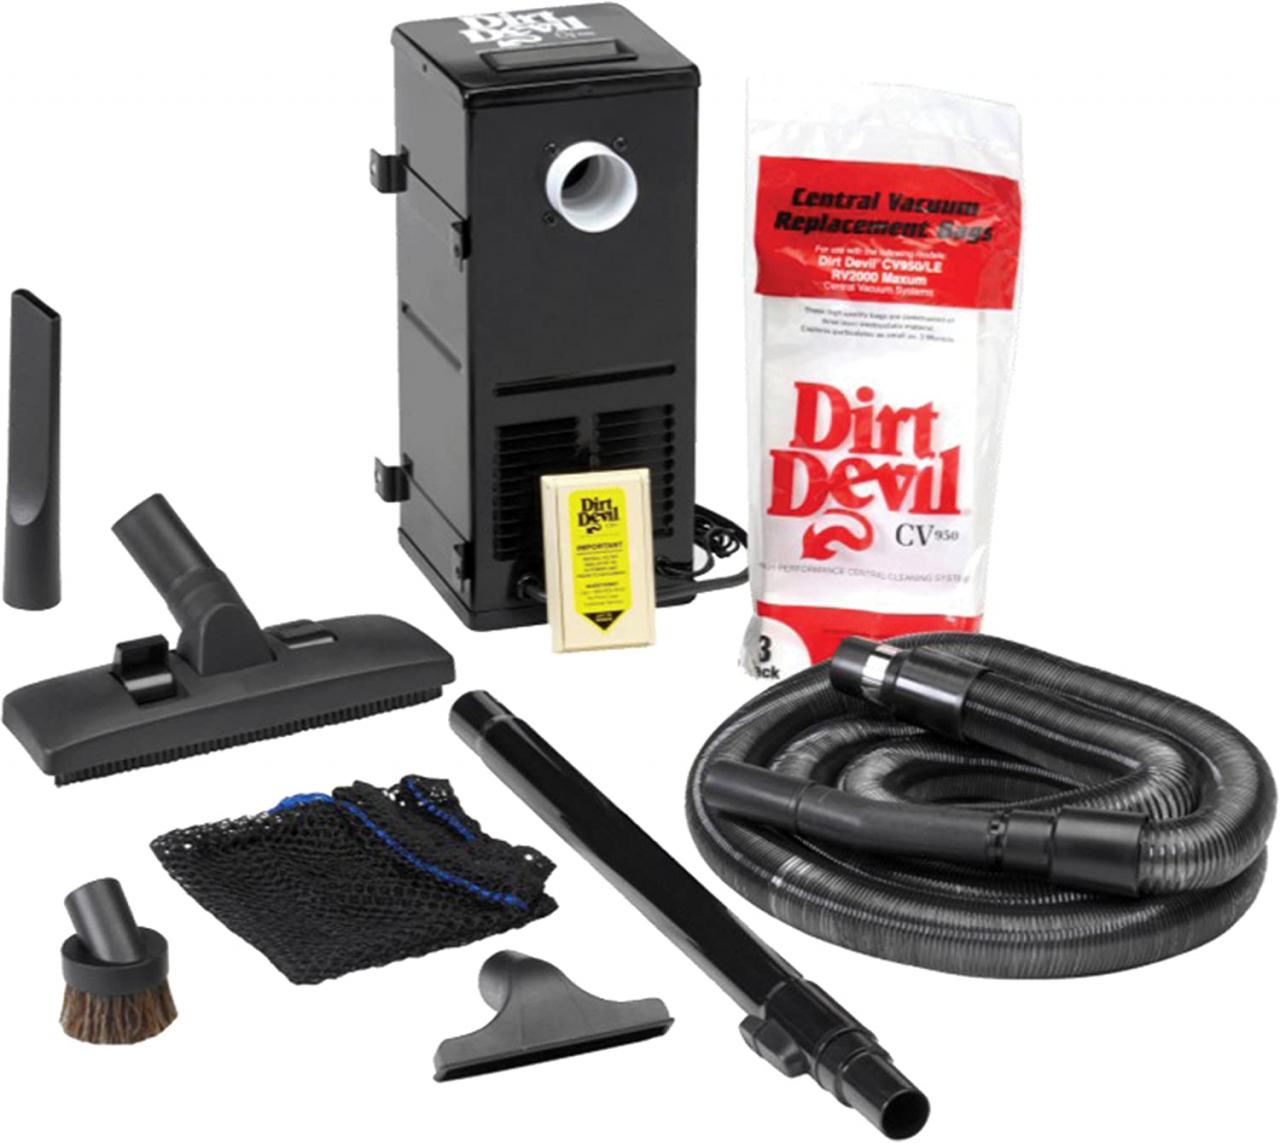 Dirt Devil® Central Vacuum for RV's and Boats